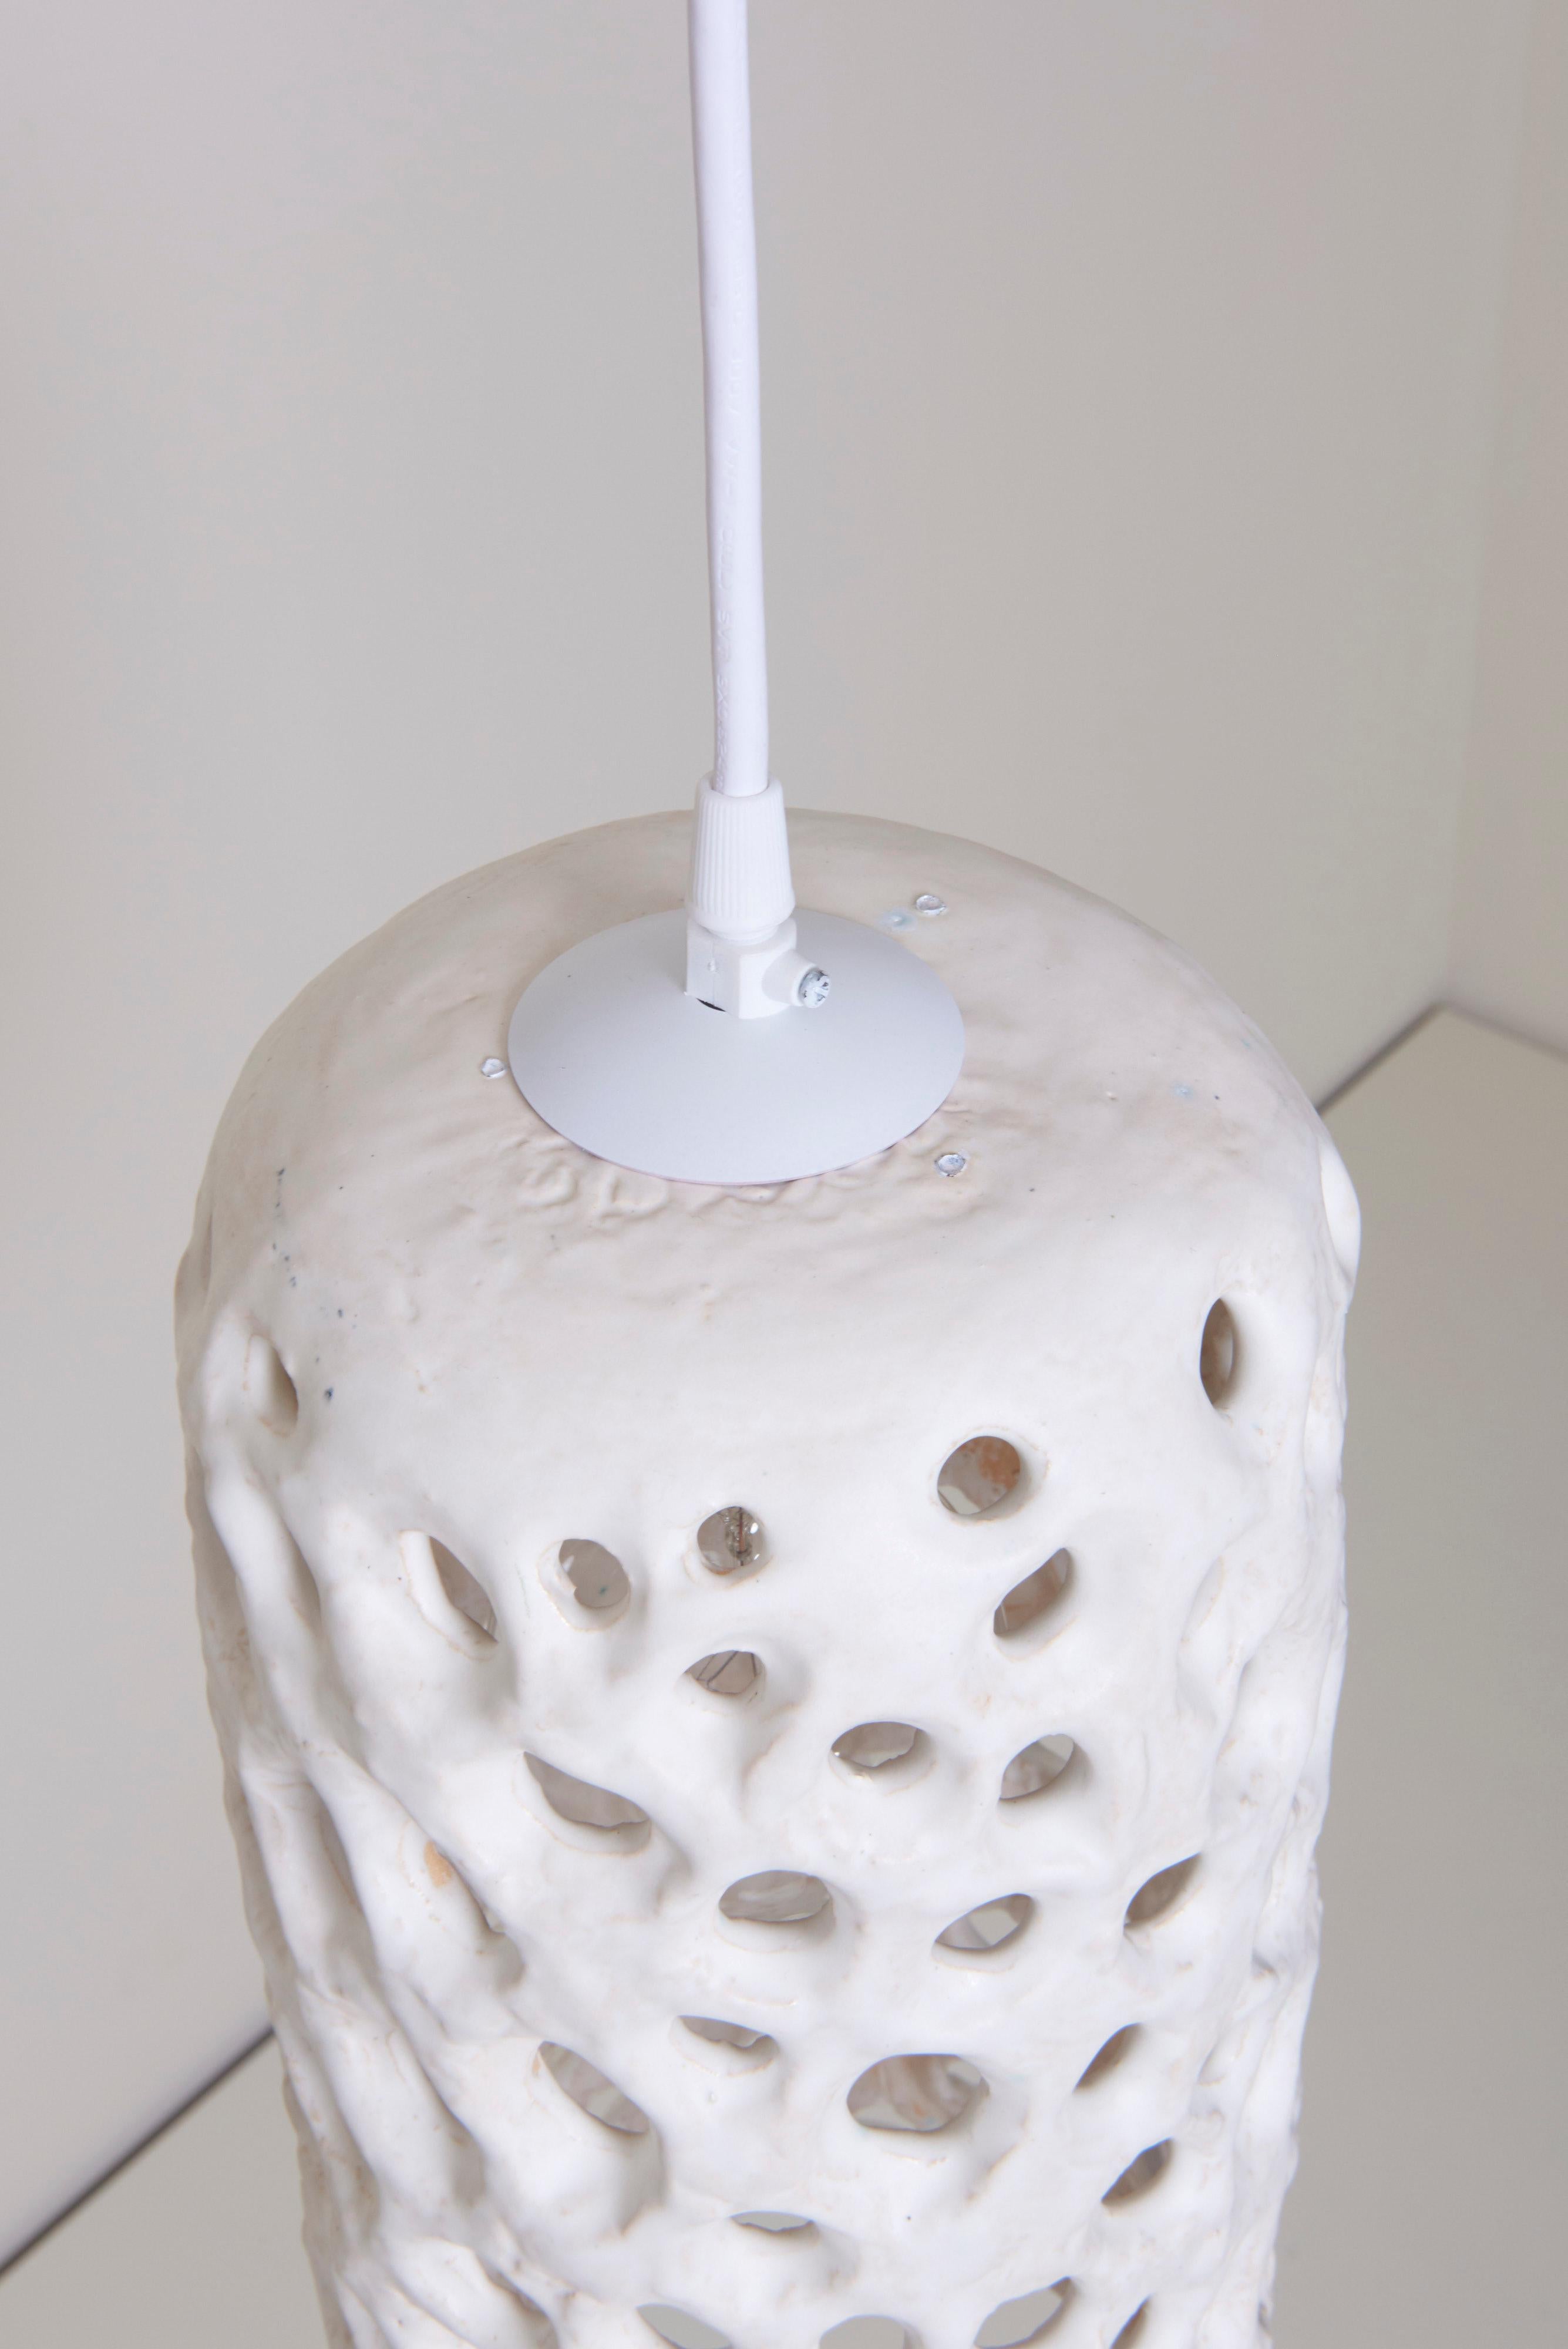 This white lantern in glazed ceramic is handmade by Stan Bitters.
Warm light soaks through the different openings.
One model A / E27 Bulb 40 watts.

To be on the safe side, the lamp should be checked locally by a specialist concerning local